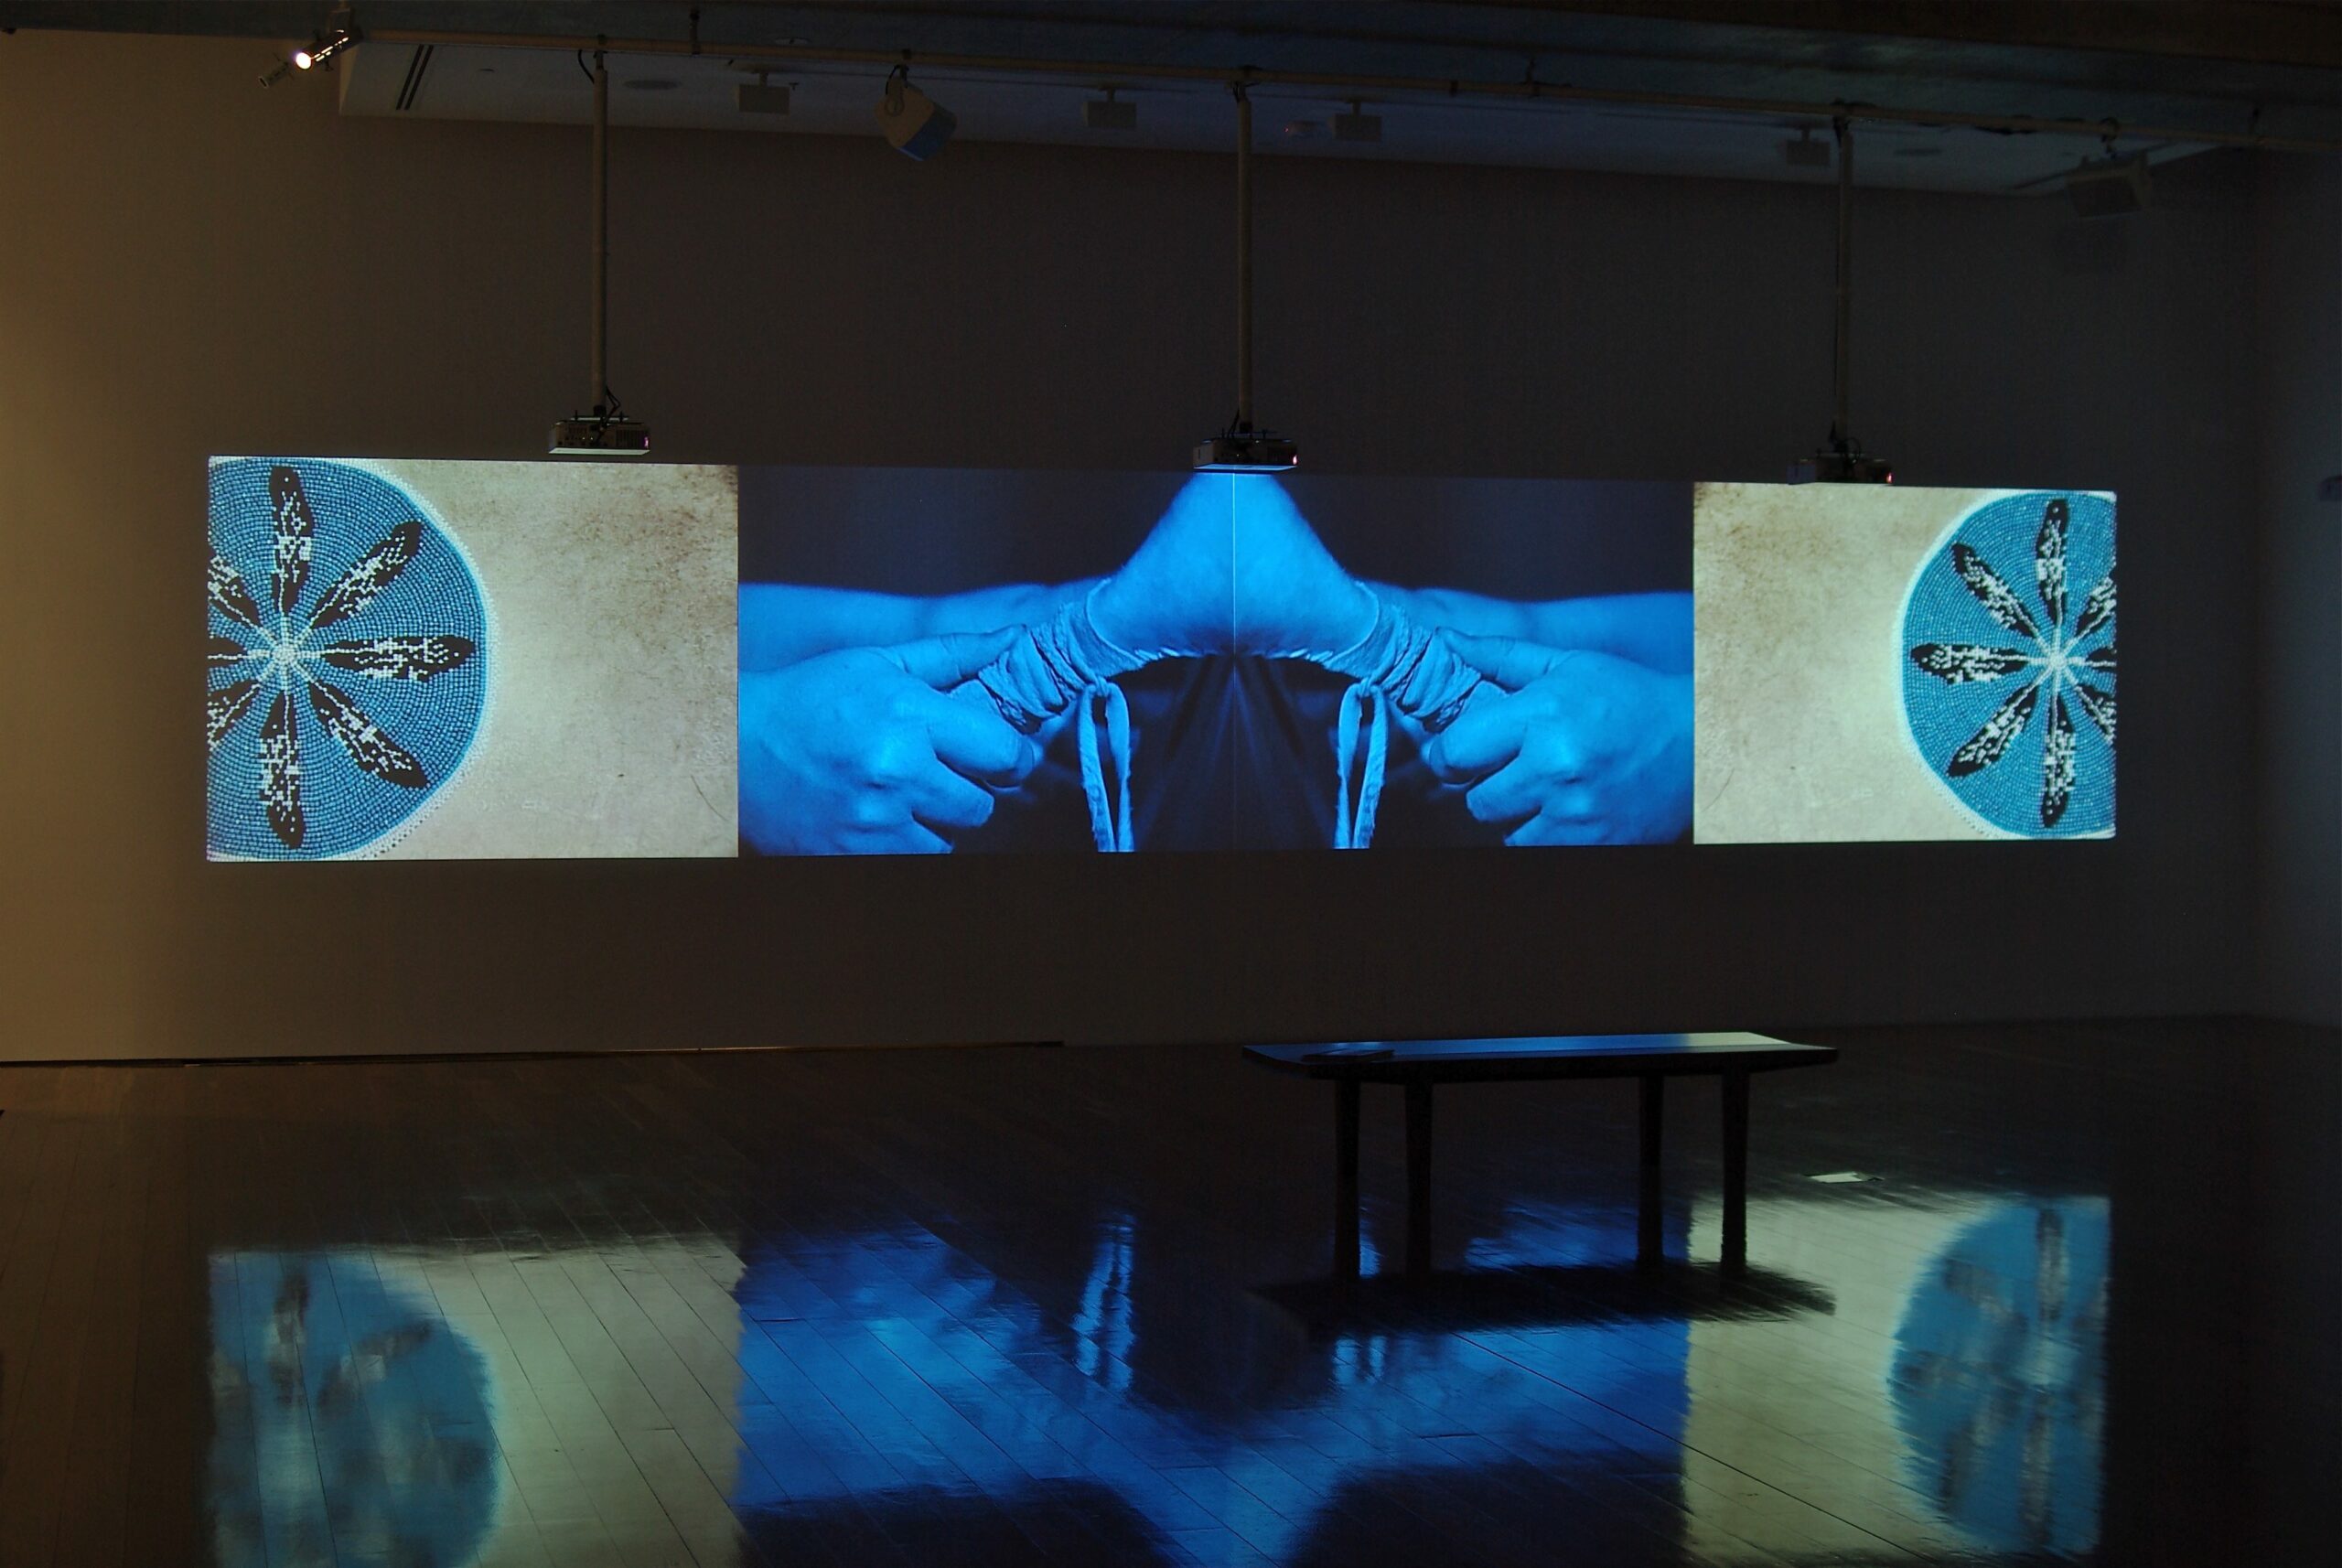 Installation view, Dana Claxton, Rattle, 2003, four-channel video installation with sound, 11:10 min. Collection of Remai Modern. Purchased with the support of the Frank and Ellen Remai Foundation, 2019.